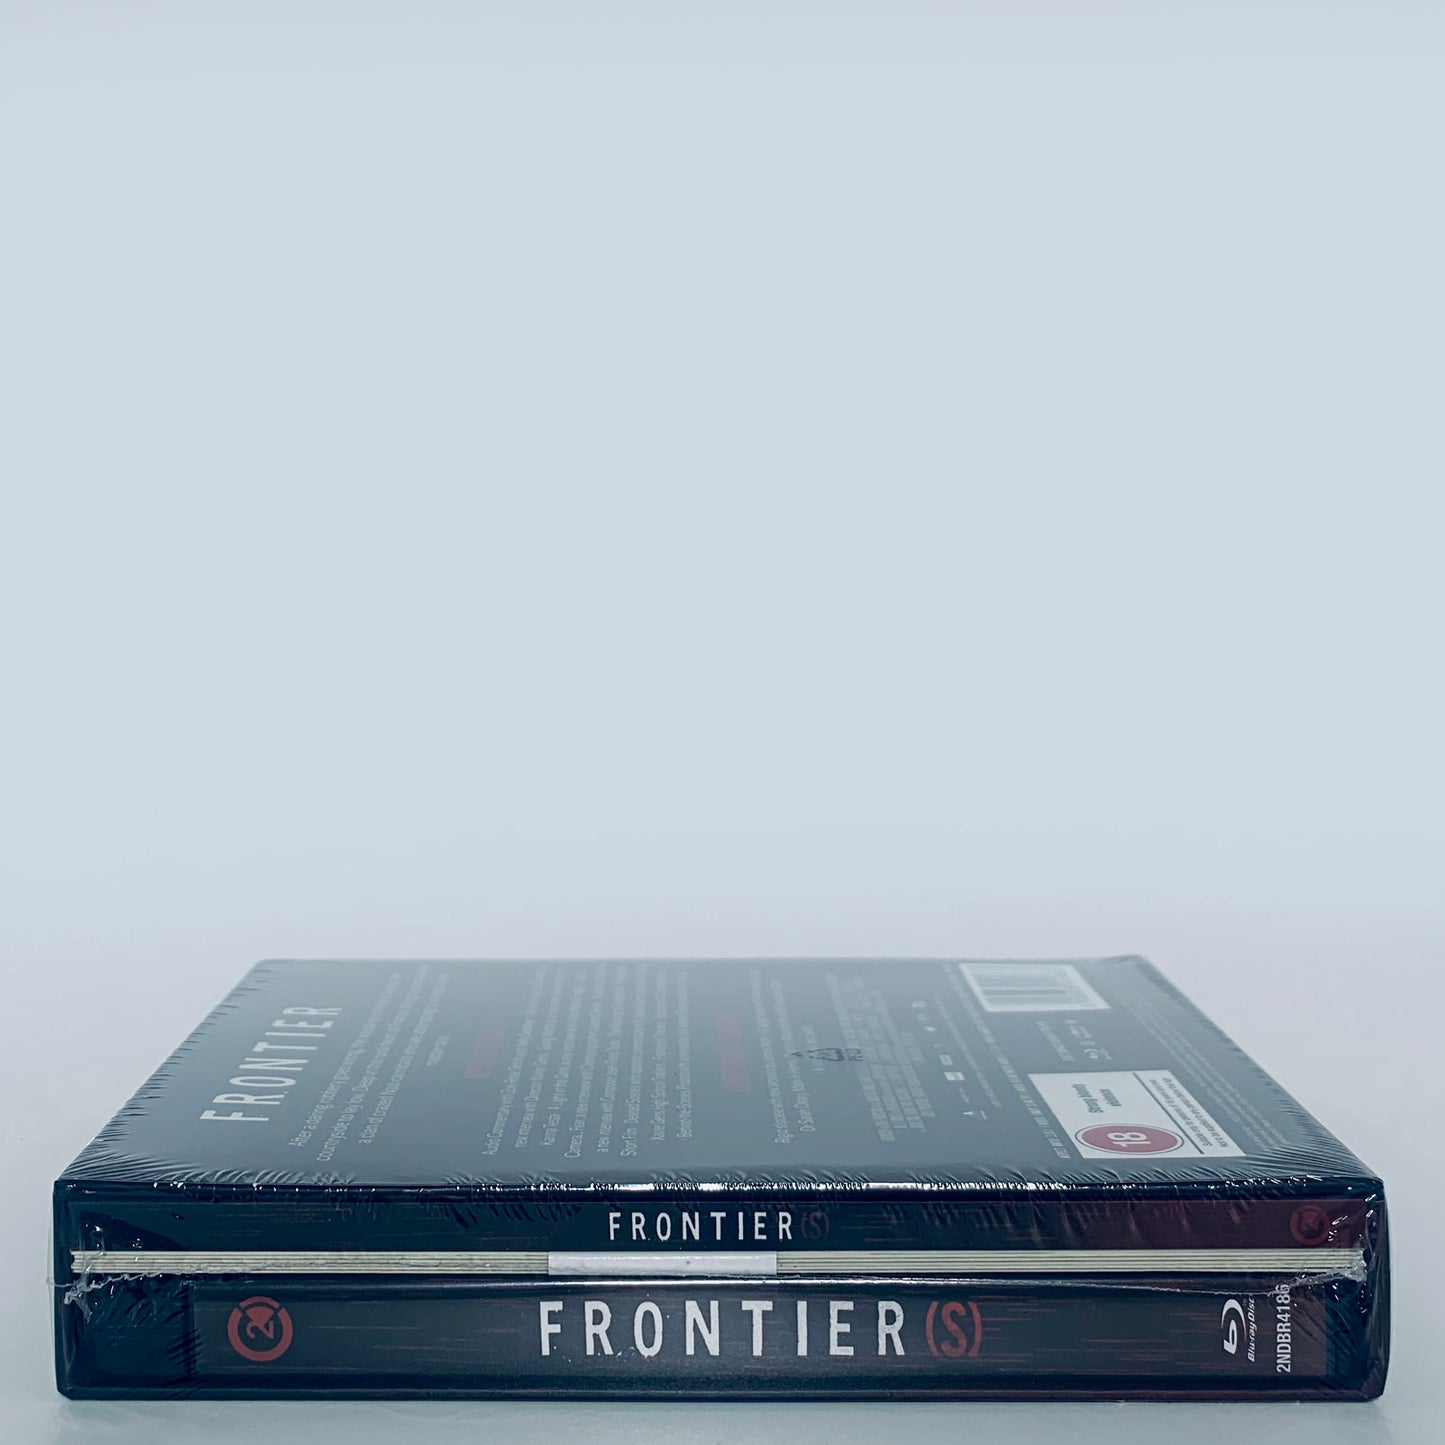 Frontier(s) Frontiers Xavier Gens Limited Edition Blu-ray Region B Second Sight